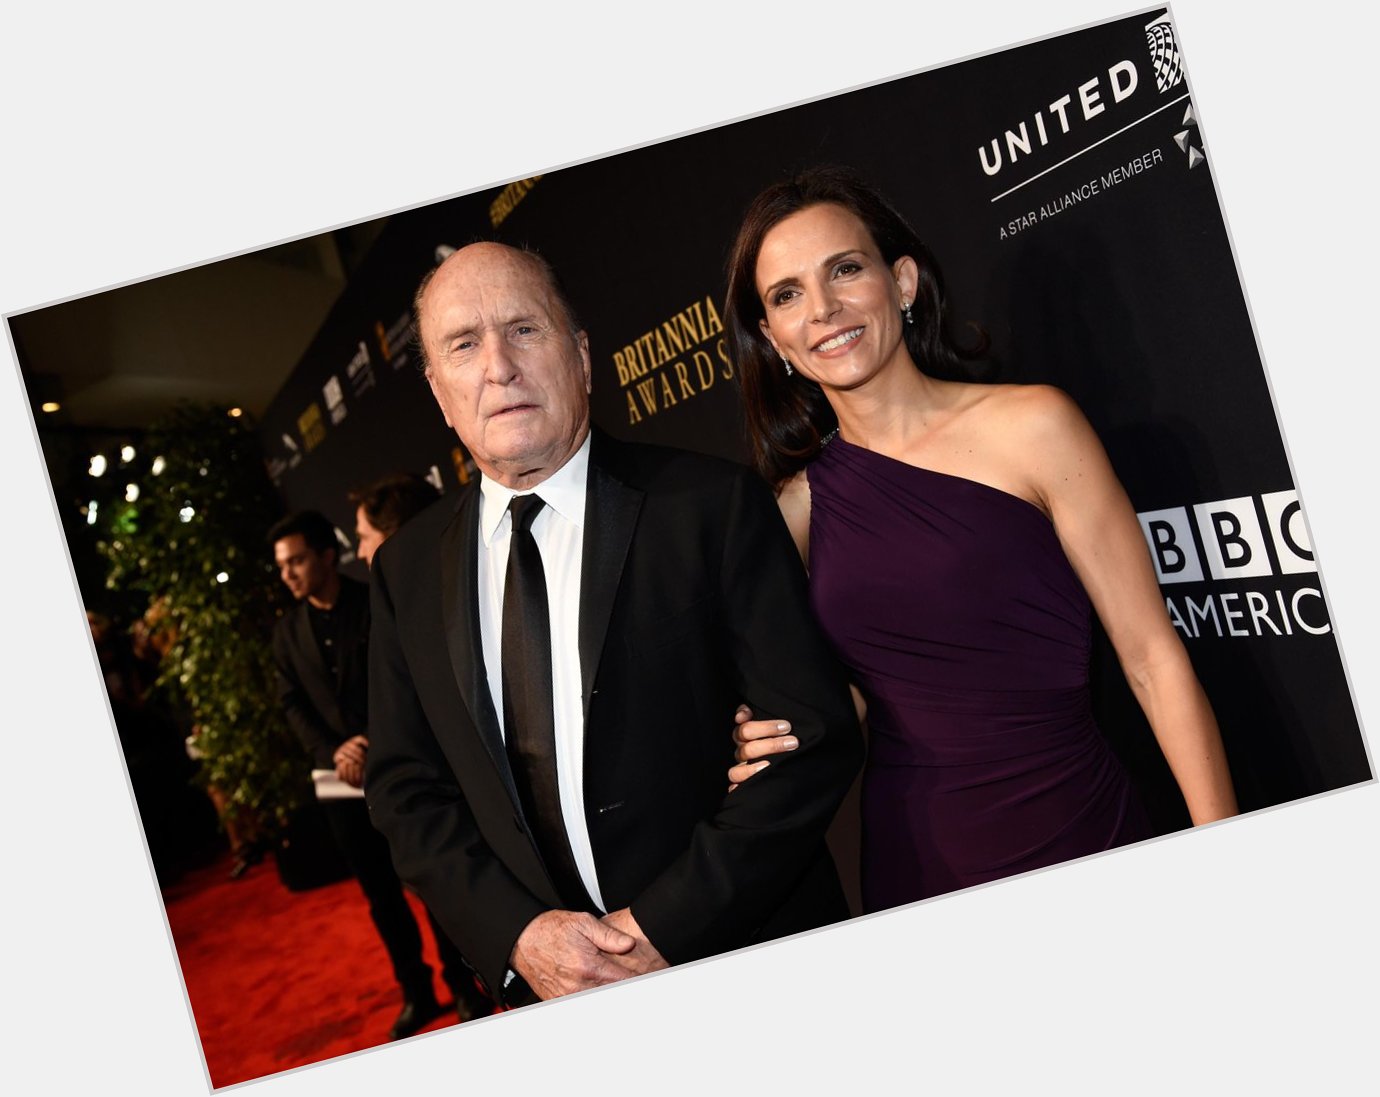 We would also like to wish Robert Duvall a very happy birthday! 